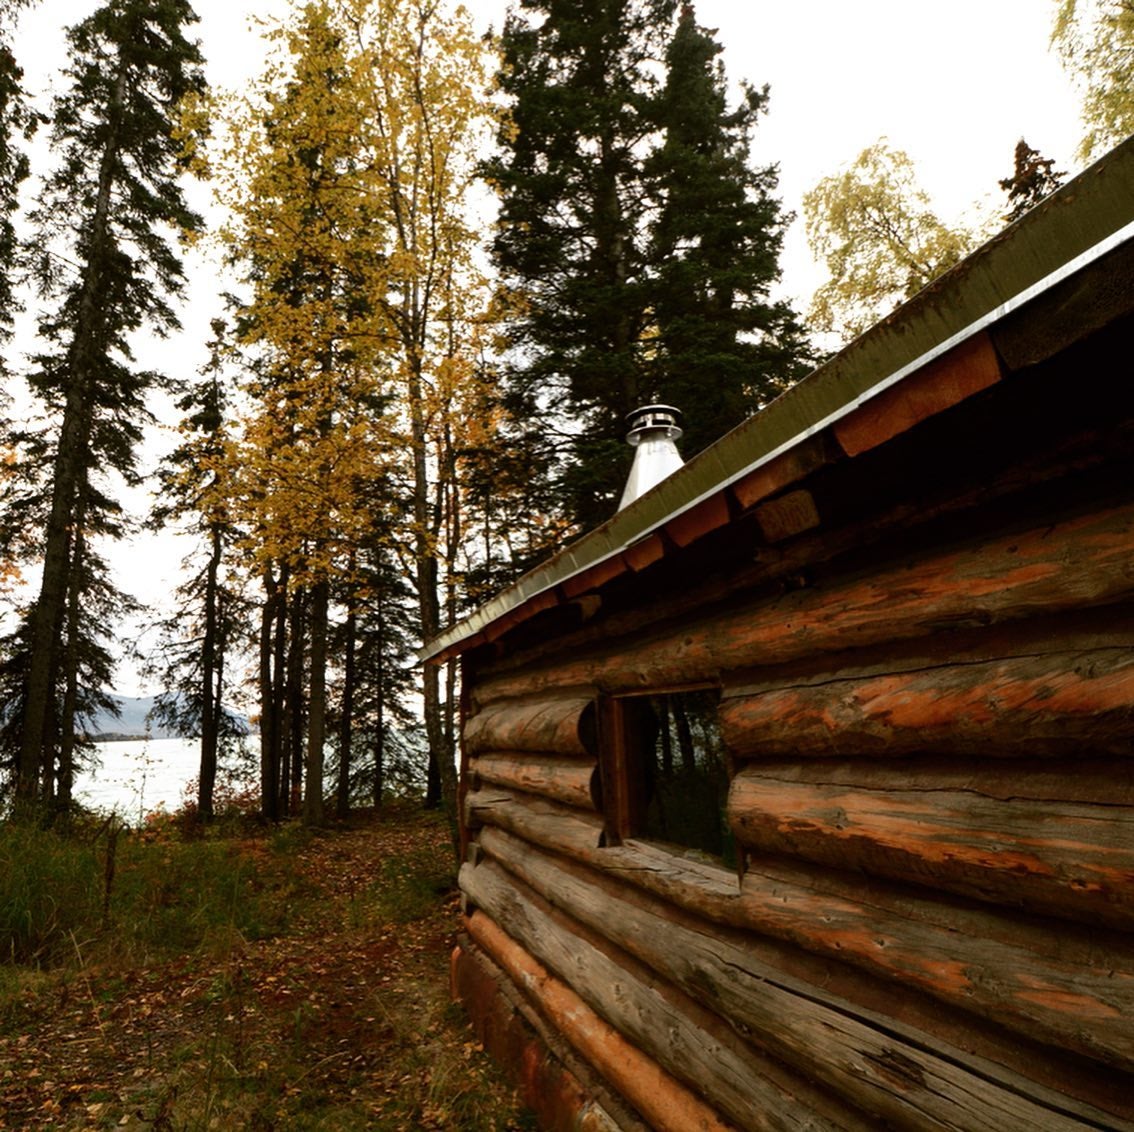 Joe Thompson's cabin is located on the shores of Lake Clark.